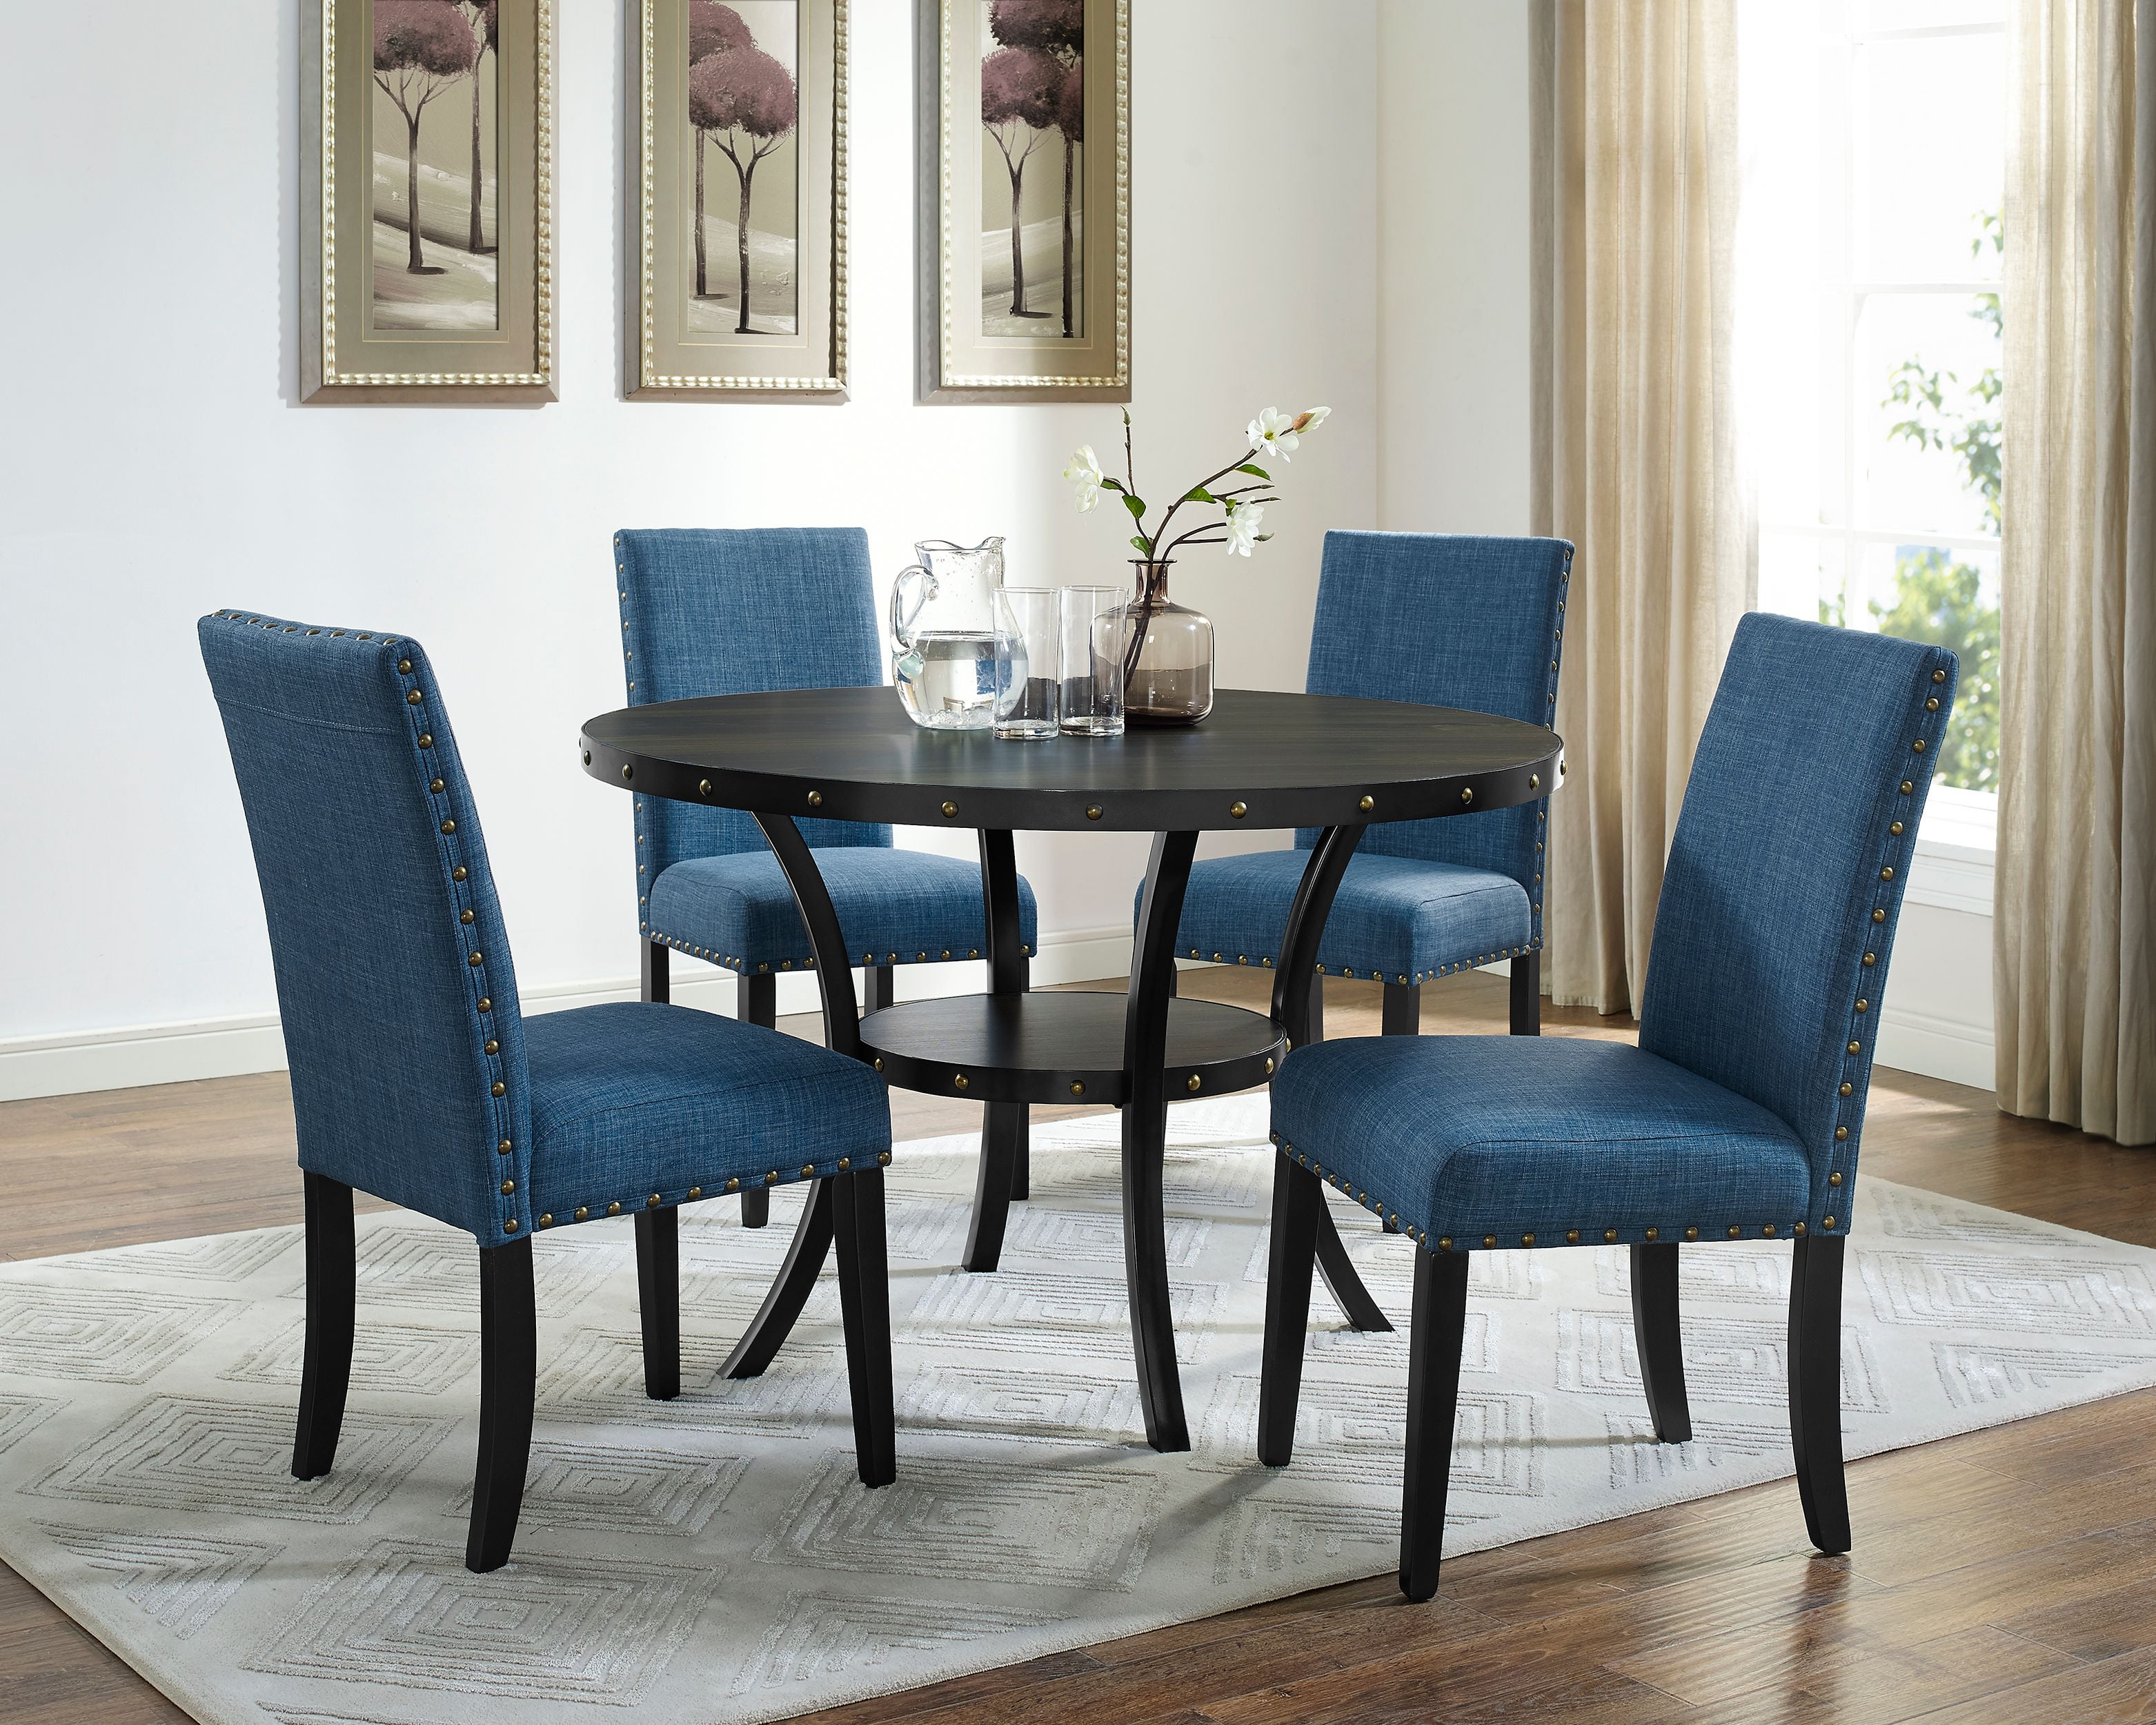 Dining Room Set With Nailhead Chairs